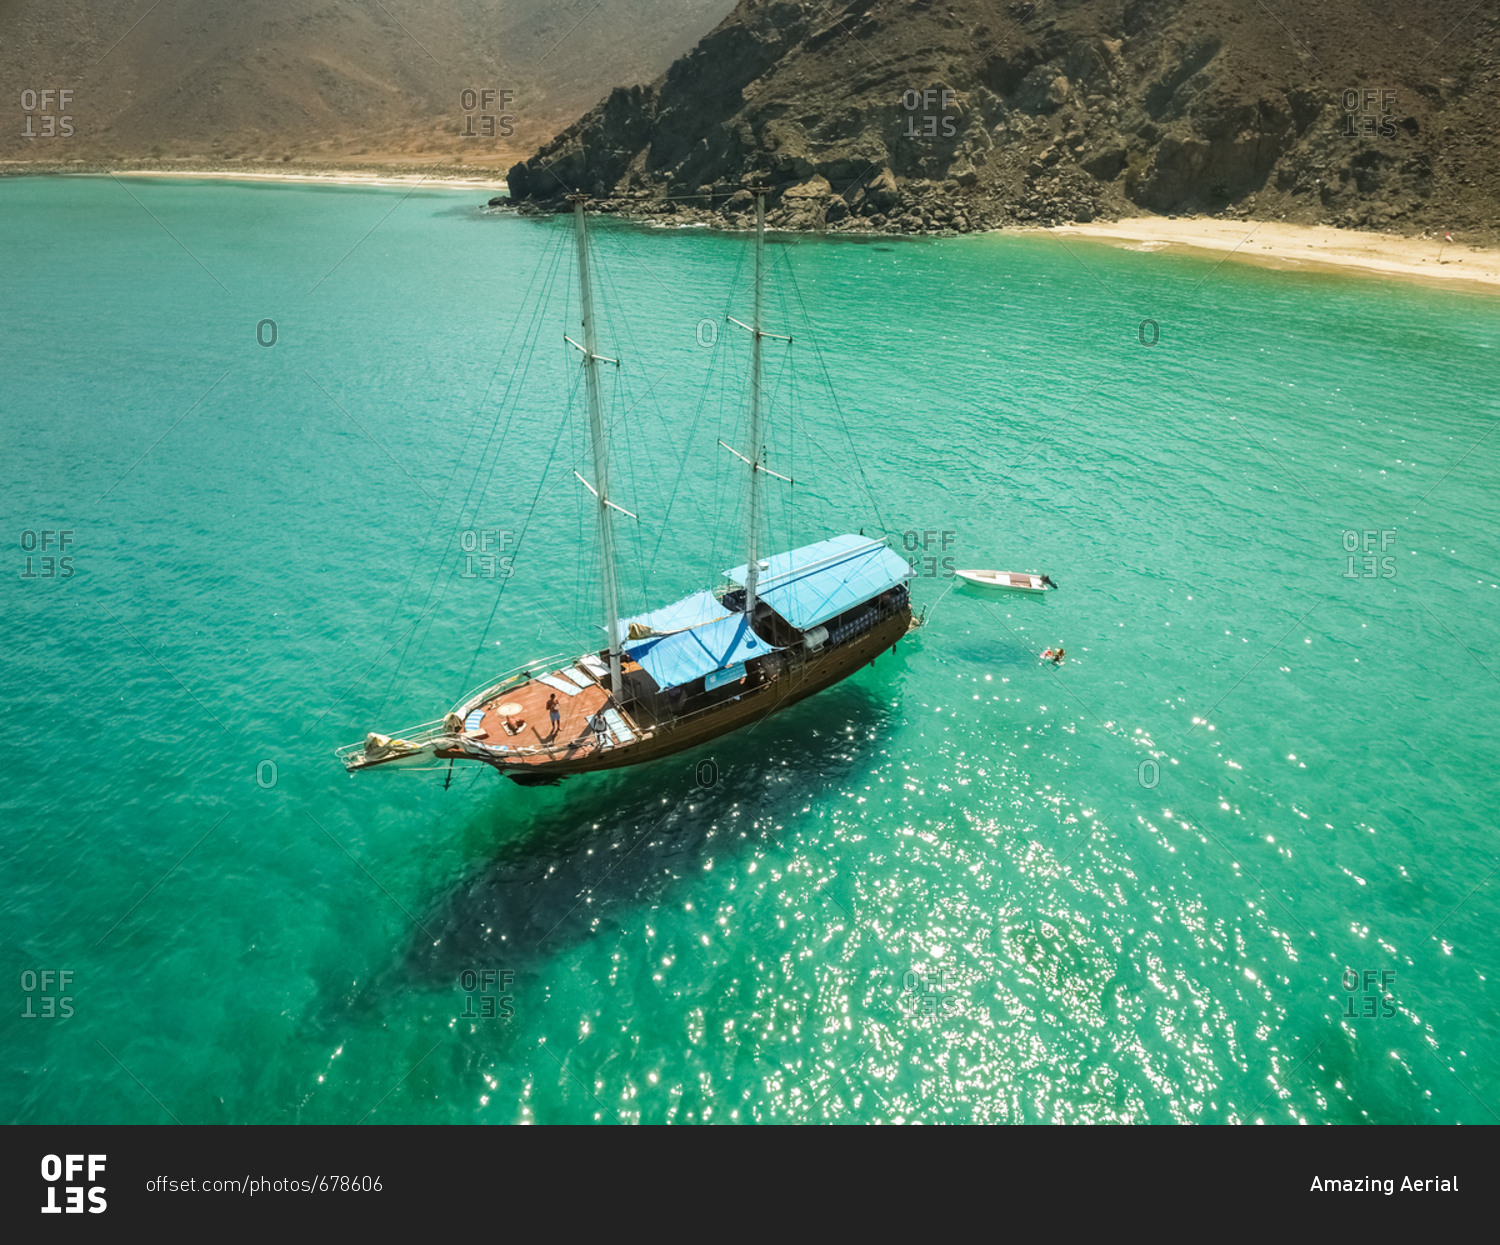 Aerial view of a sailboat in the picturesque bay of Khor Fakkan, United Arab Emirates.